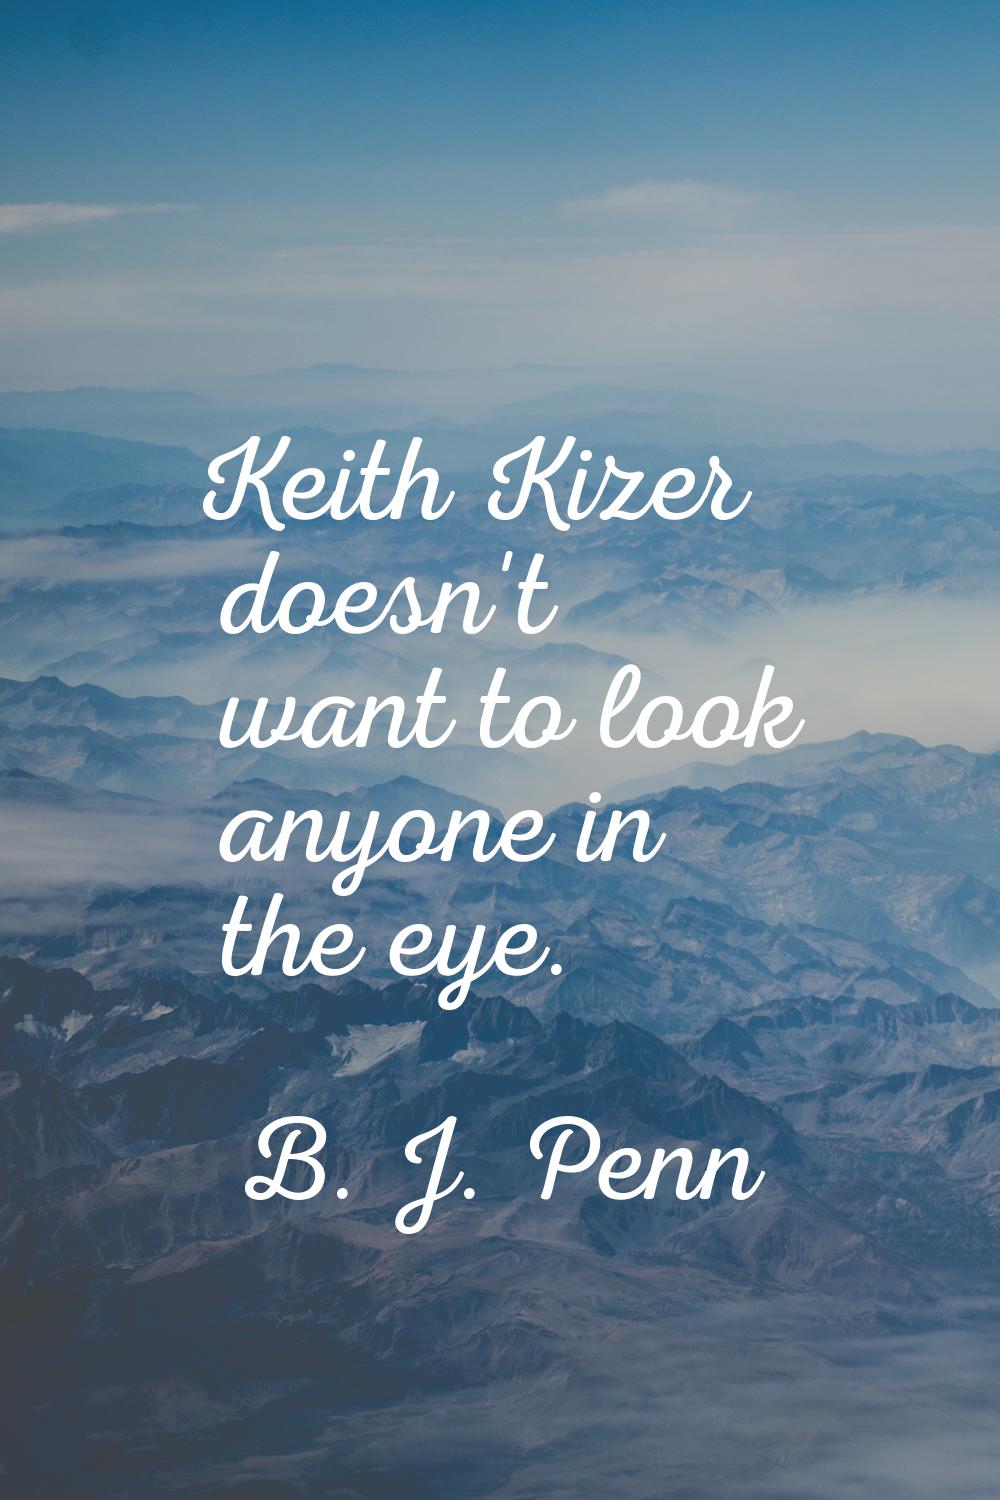 Keith Kizer doesn't want to look anyone in the eye.